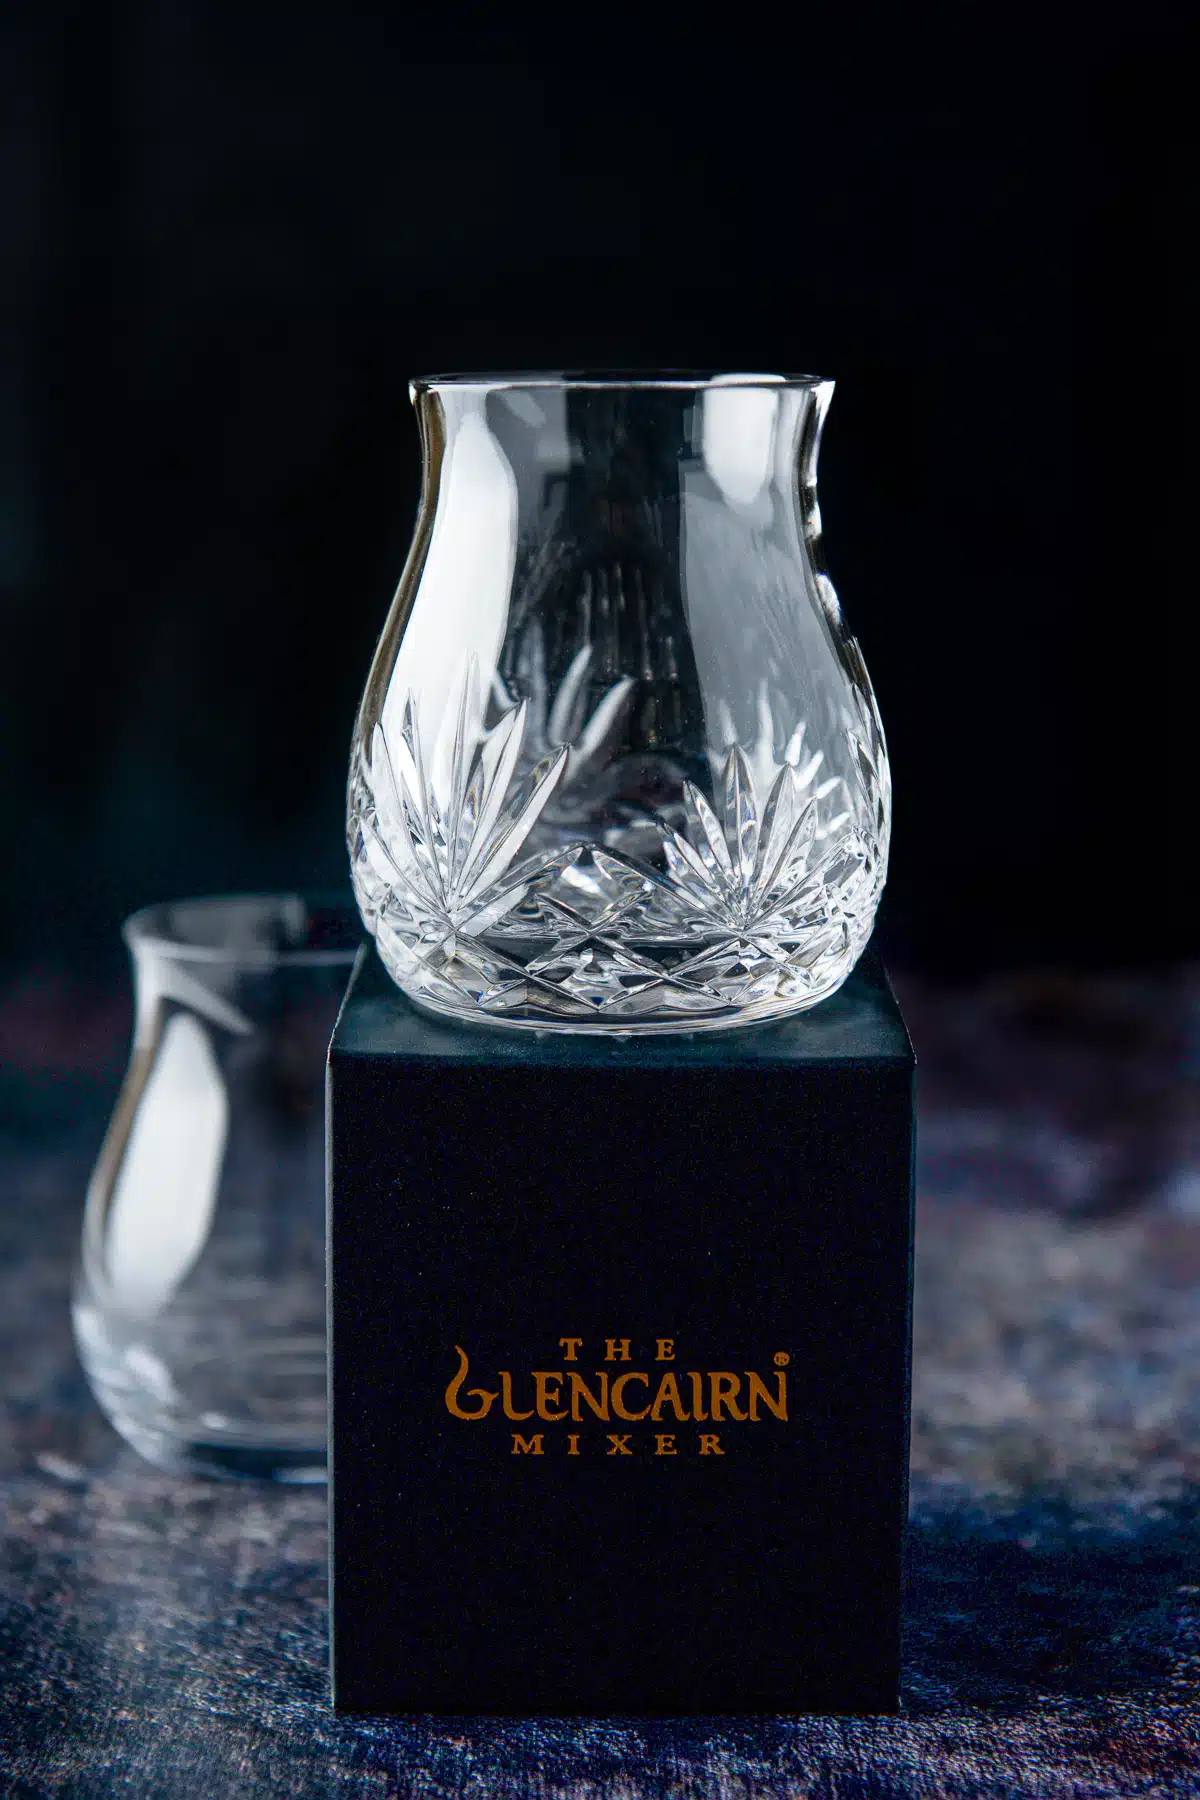 Two Glencairn mixer glasses on a colorful table. One is on top of the box it came in